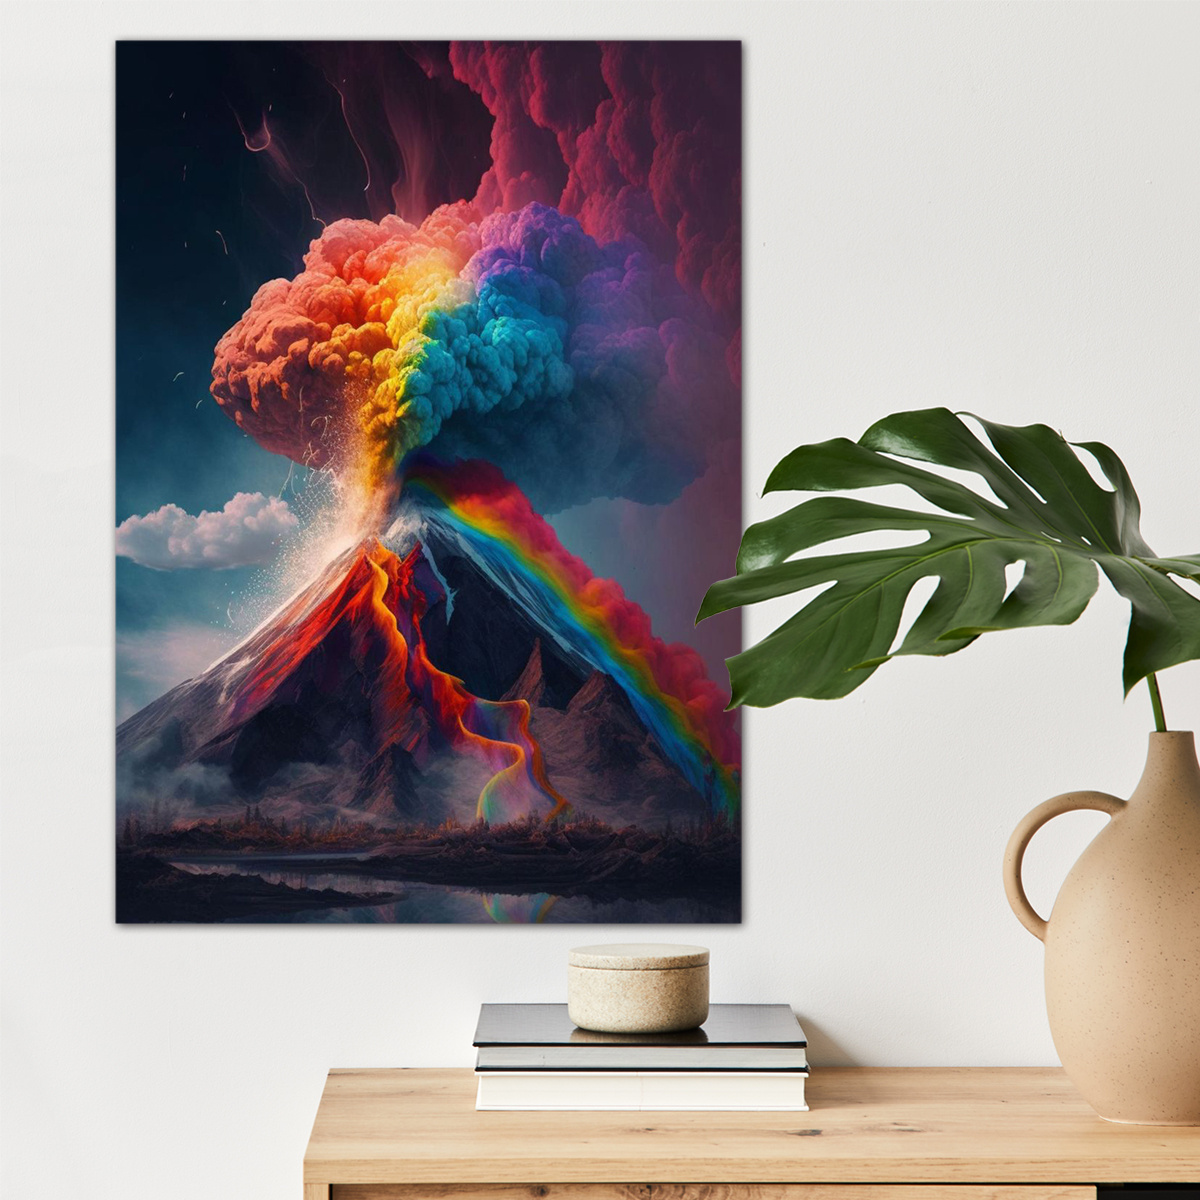 

1pc Rainbow Volcano Canvas Wall Art For Decor, High Quality And Fans Wall Decor, Canvas Prints For Office Cafe Decor, Perfect Gift And Decoration